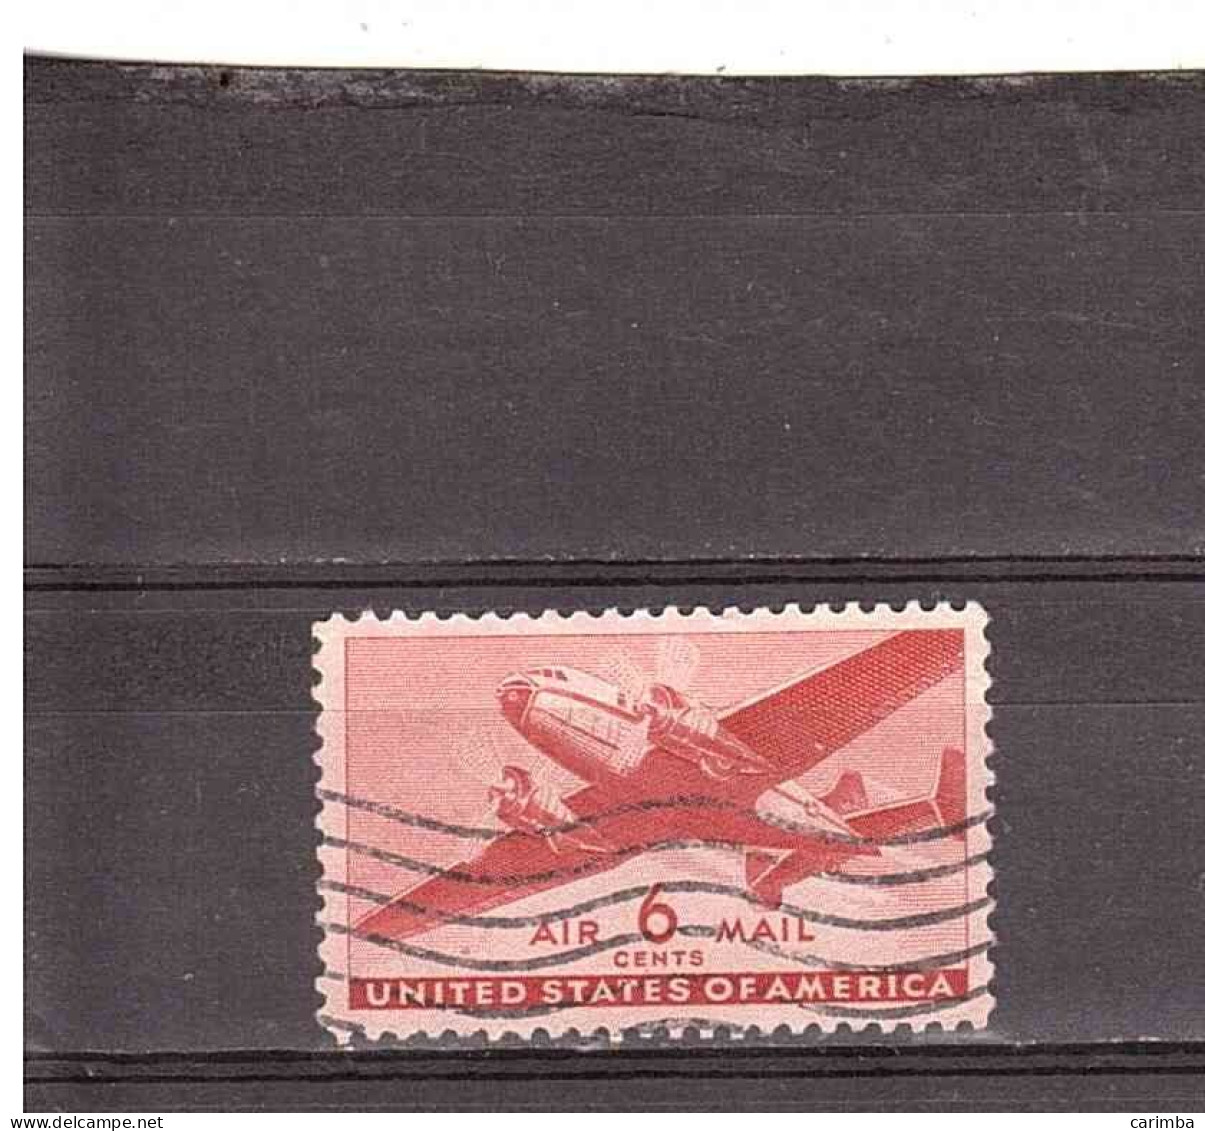 AIR MAIL 6 CENTS - 2a. 1941-1960 Used